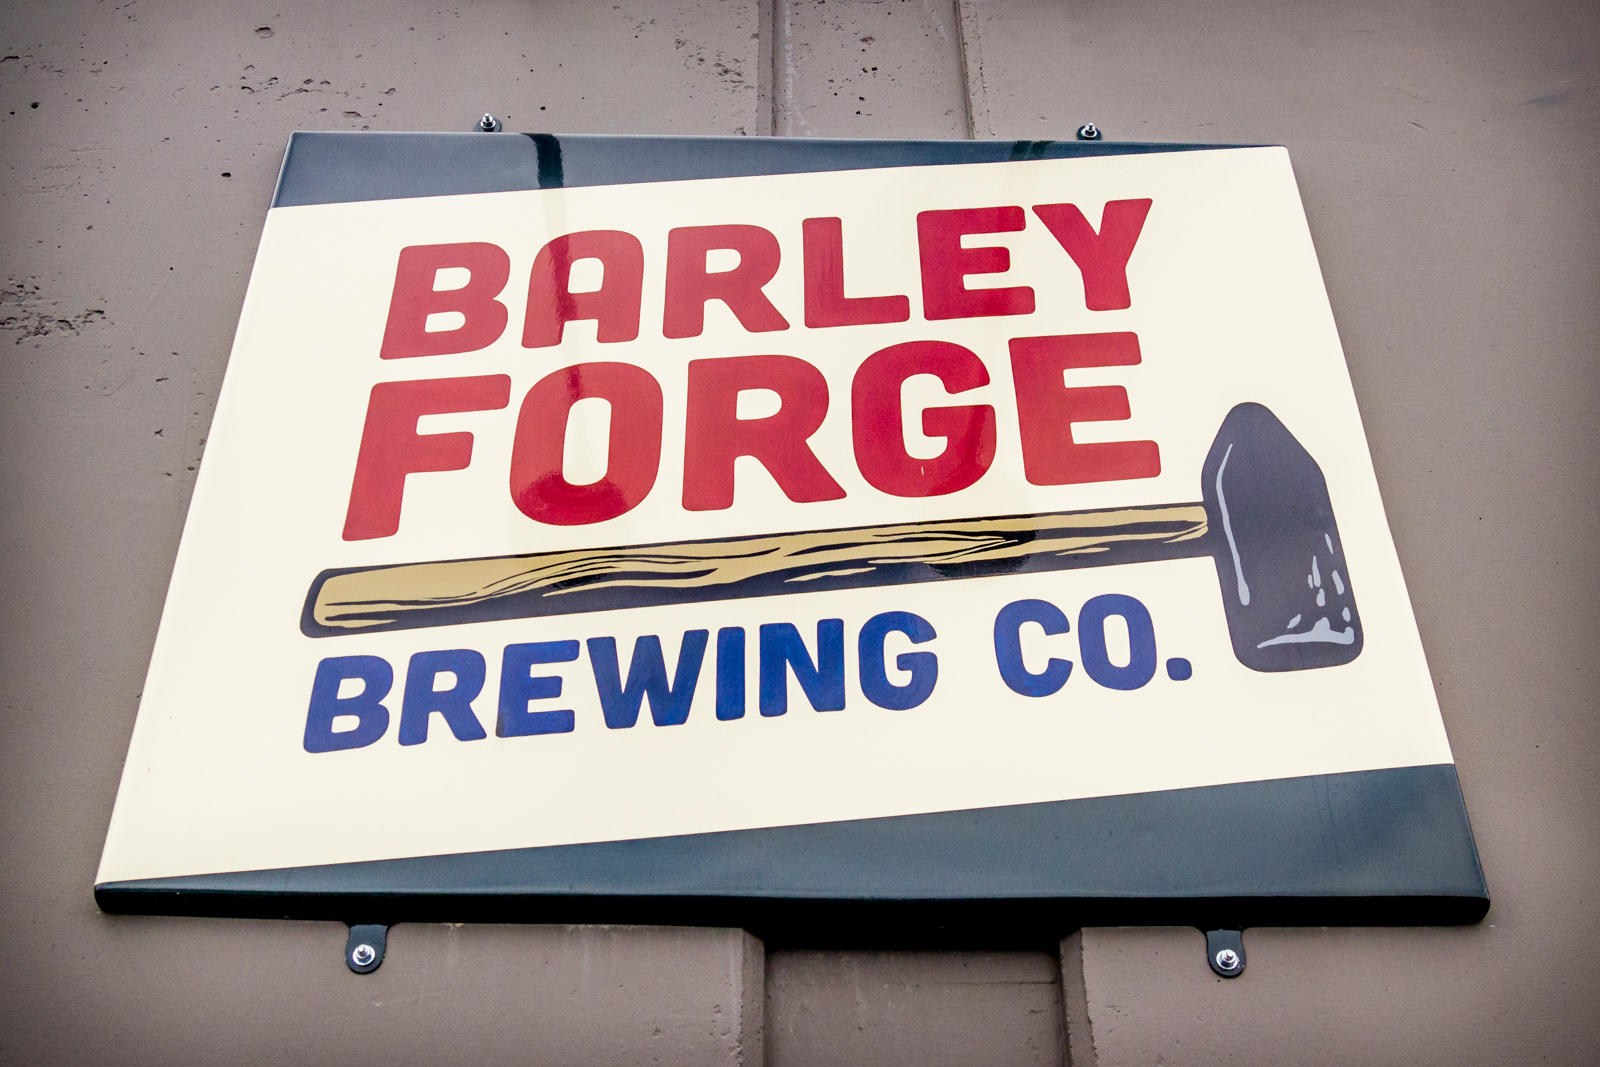 Barley Forge Brewing Co.